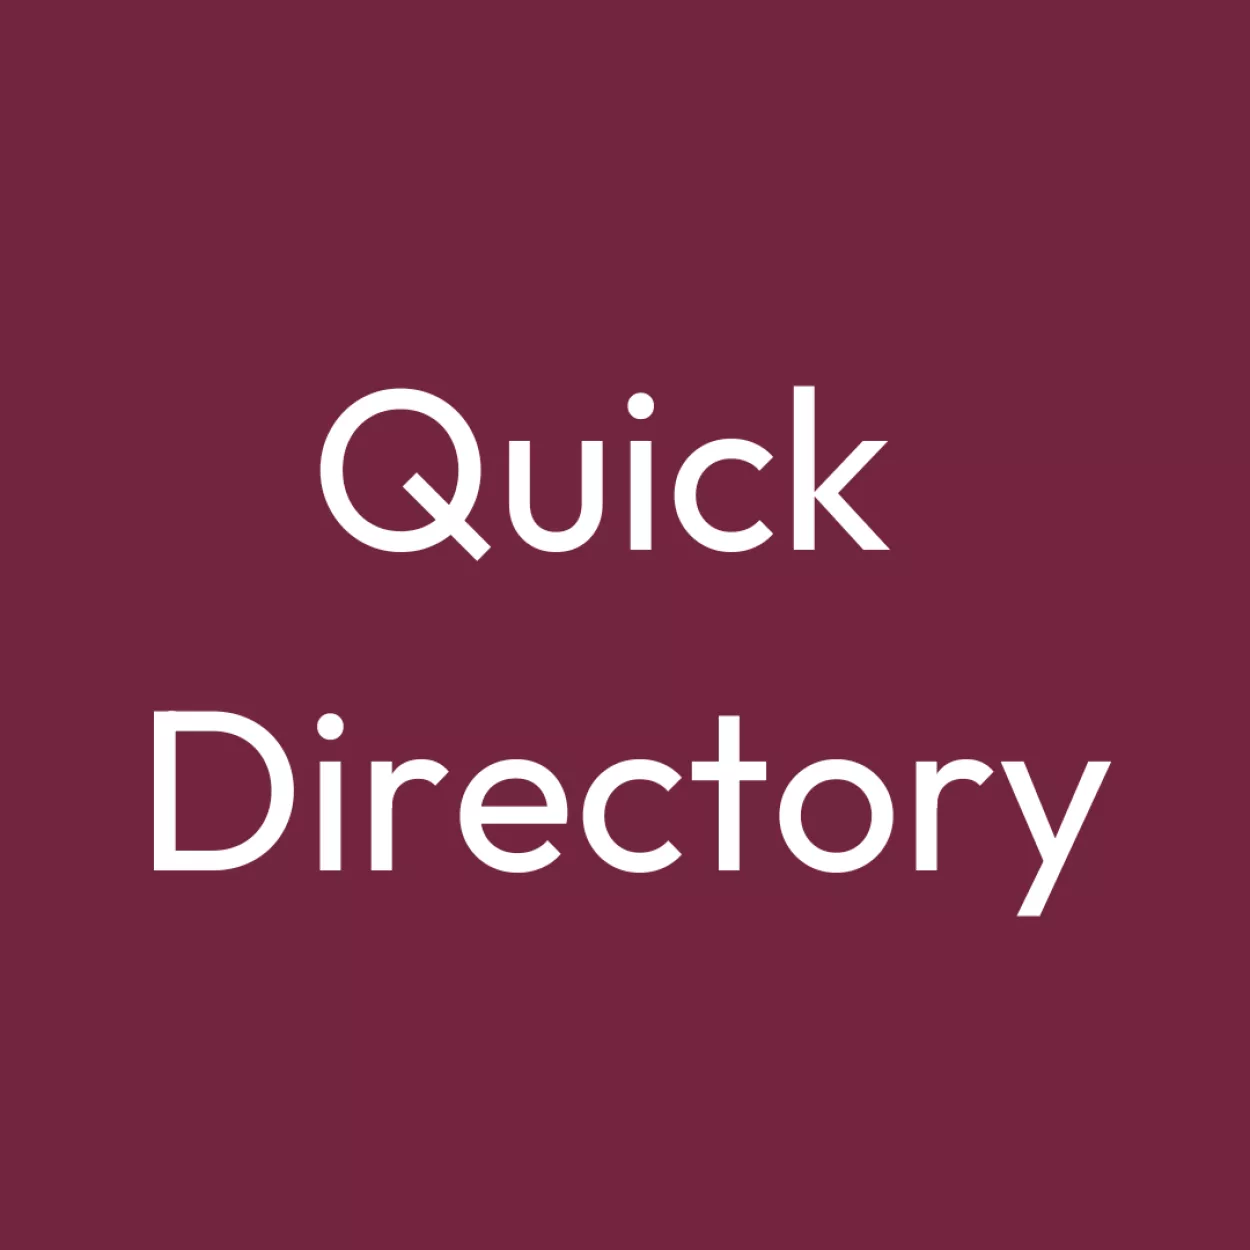 White text on maroon background saying Quick Directory